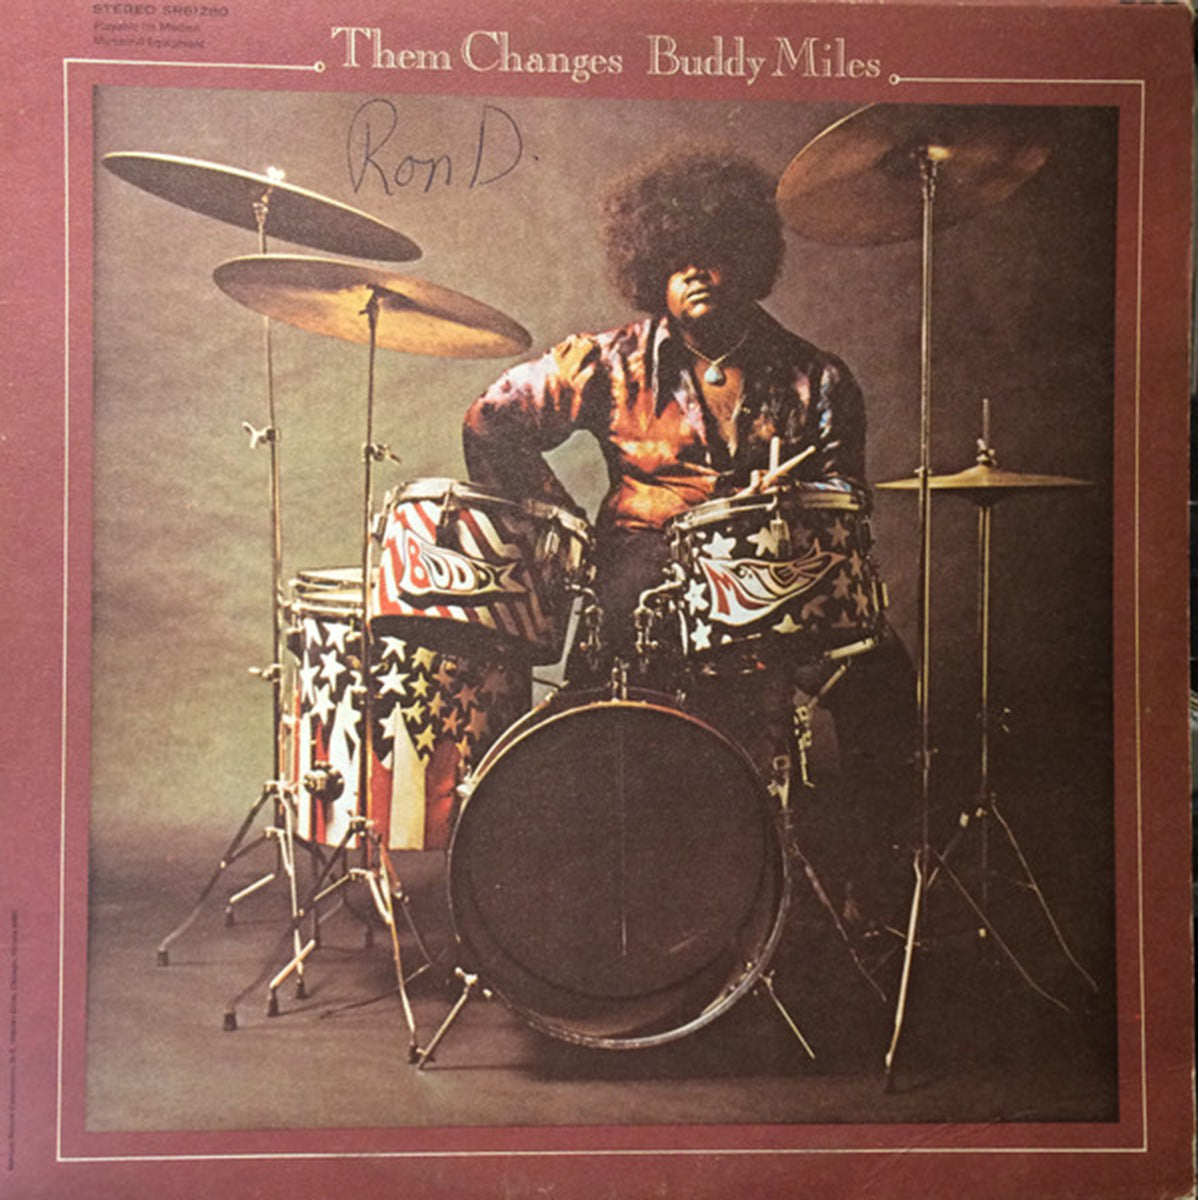 Buddy Miles – Them Changes - 1978 US Pressing